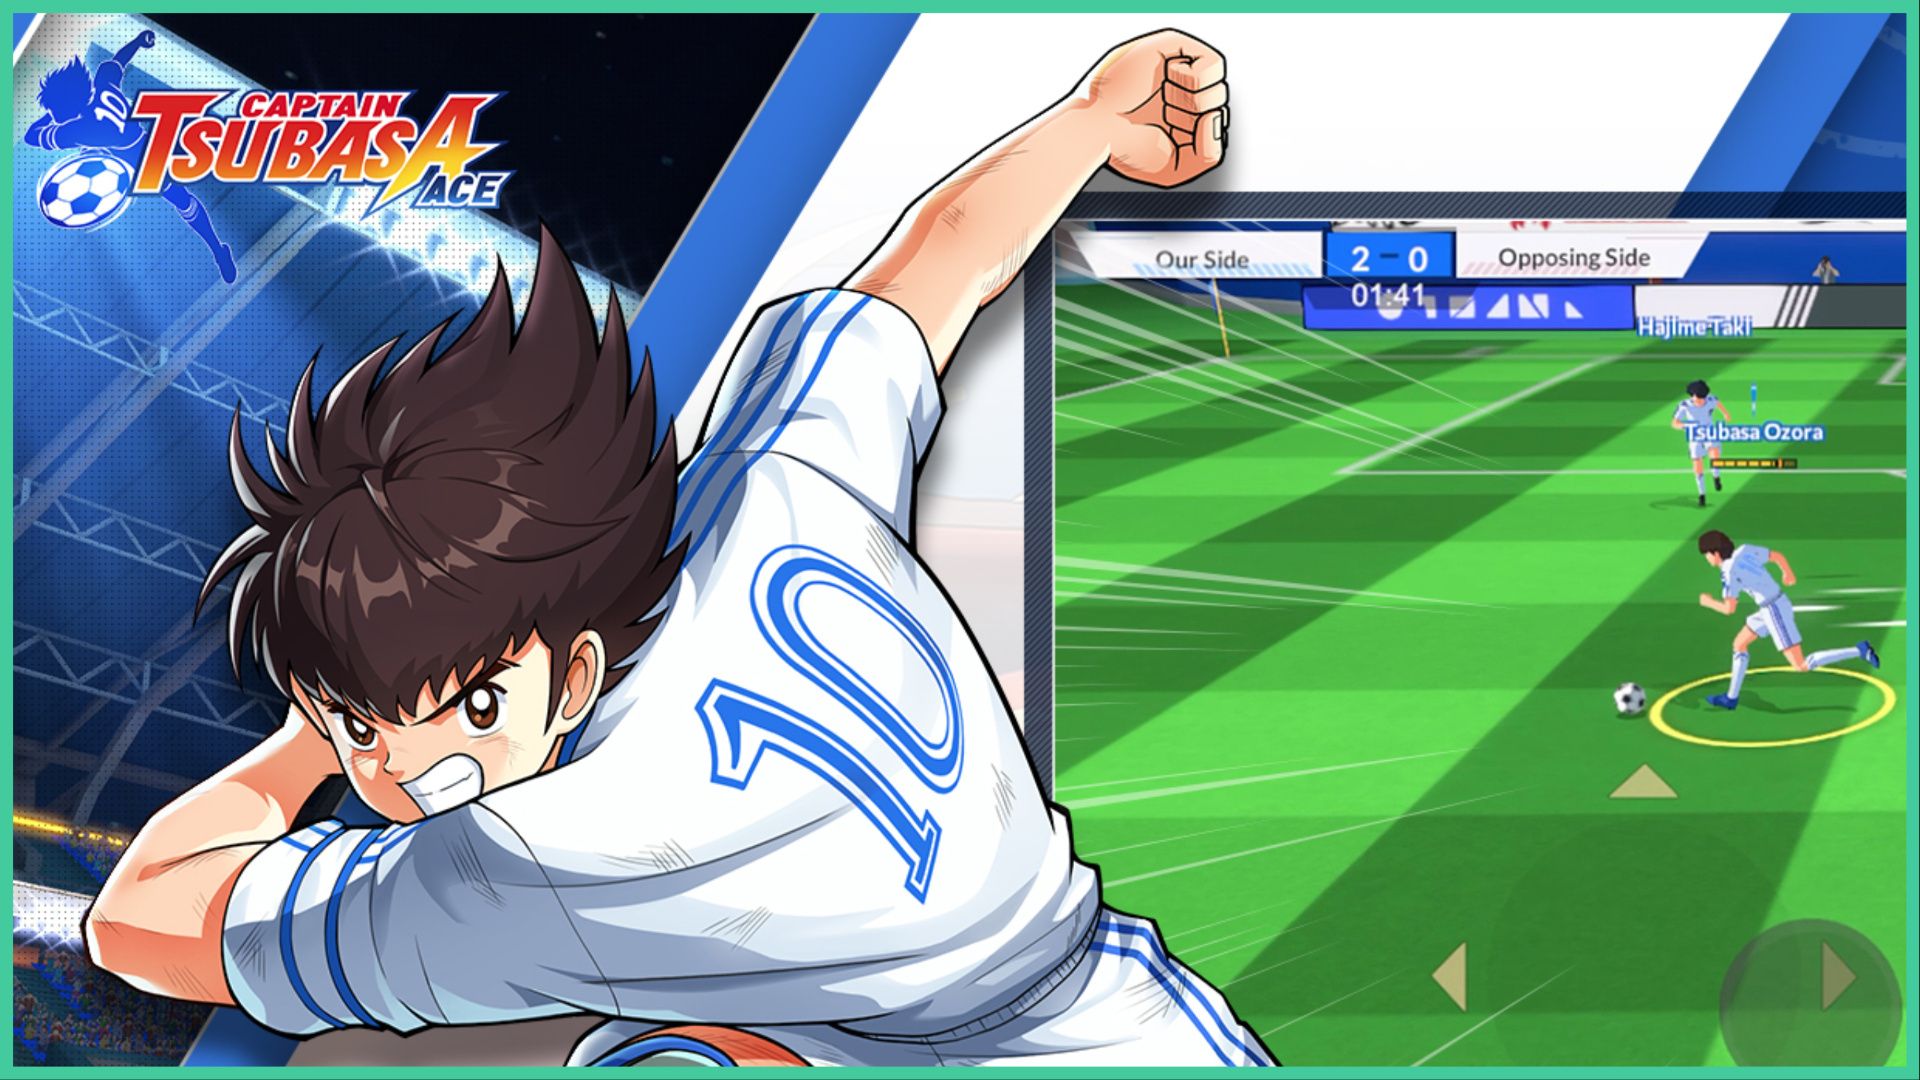 feature image for our captain tsubasa ace codes, the image features promo art for the game of tsusbasa from the franchise gearing up to strike a football, with his arm back and his teeth gritted, there is also a screenshot from the game of characters playing football on the pitch as tsubasa ozora chases the football and hajimi taki approaches him